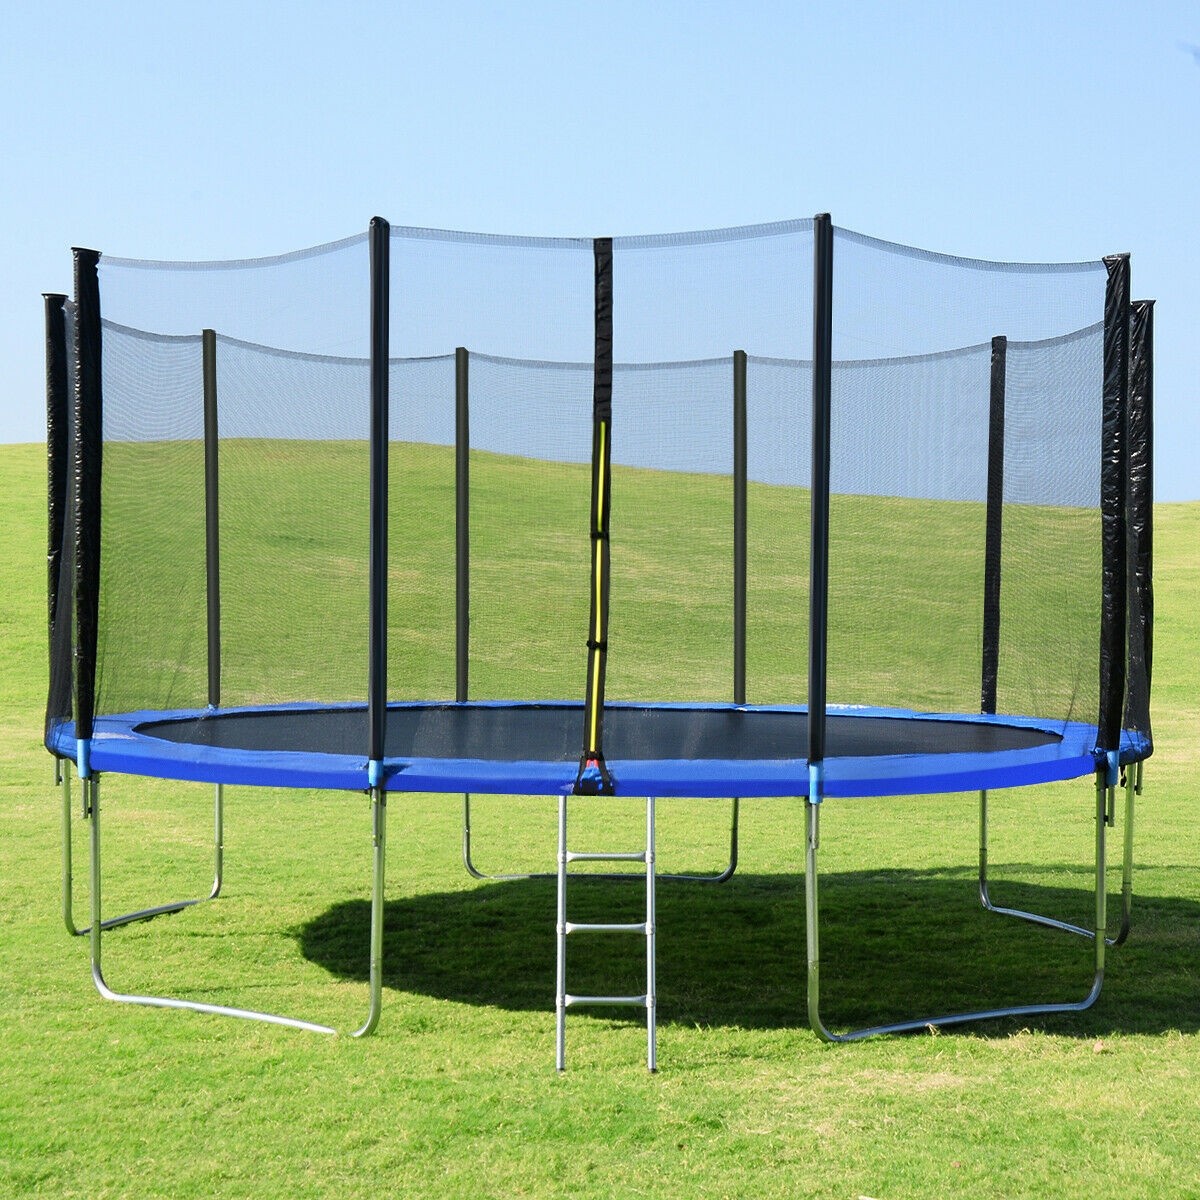 15 Ft. Trampoline Combo Bounce Jump Safety Enclosure Net With Ladder